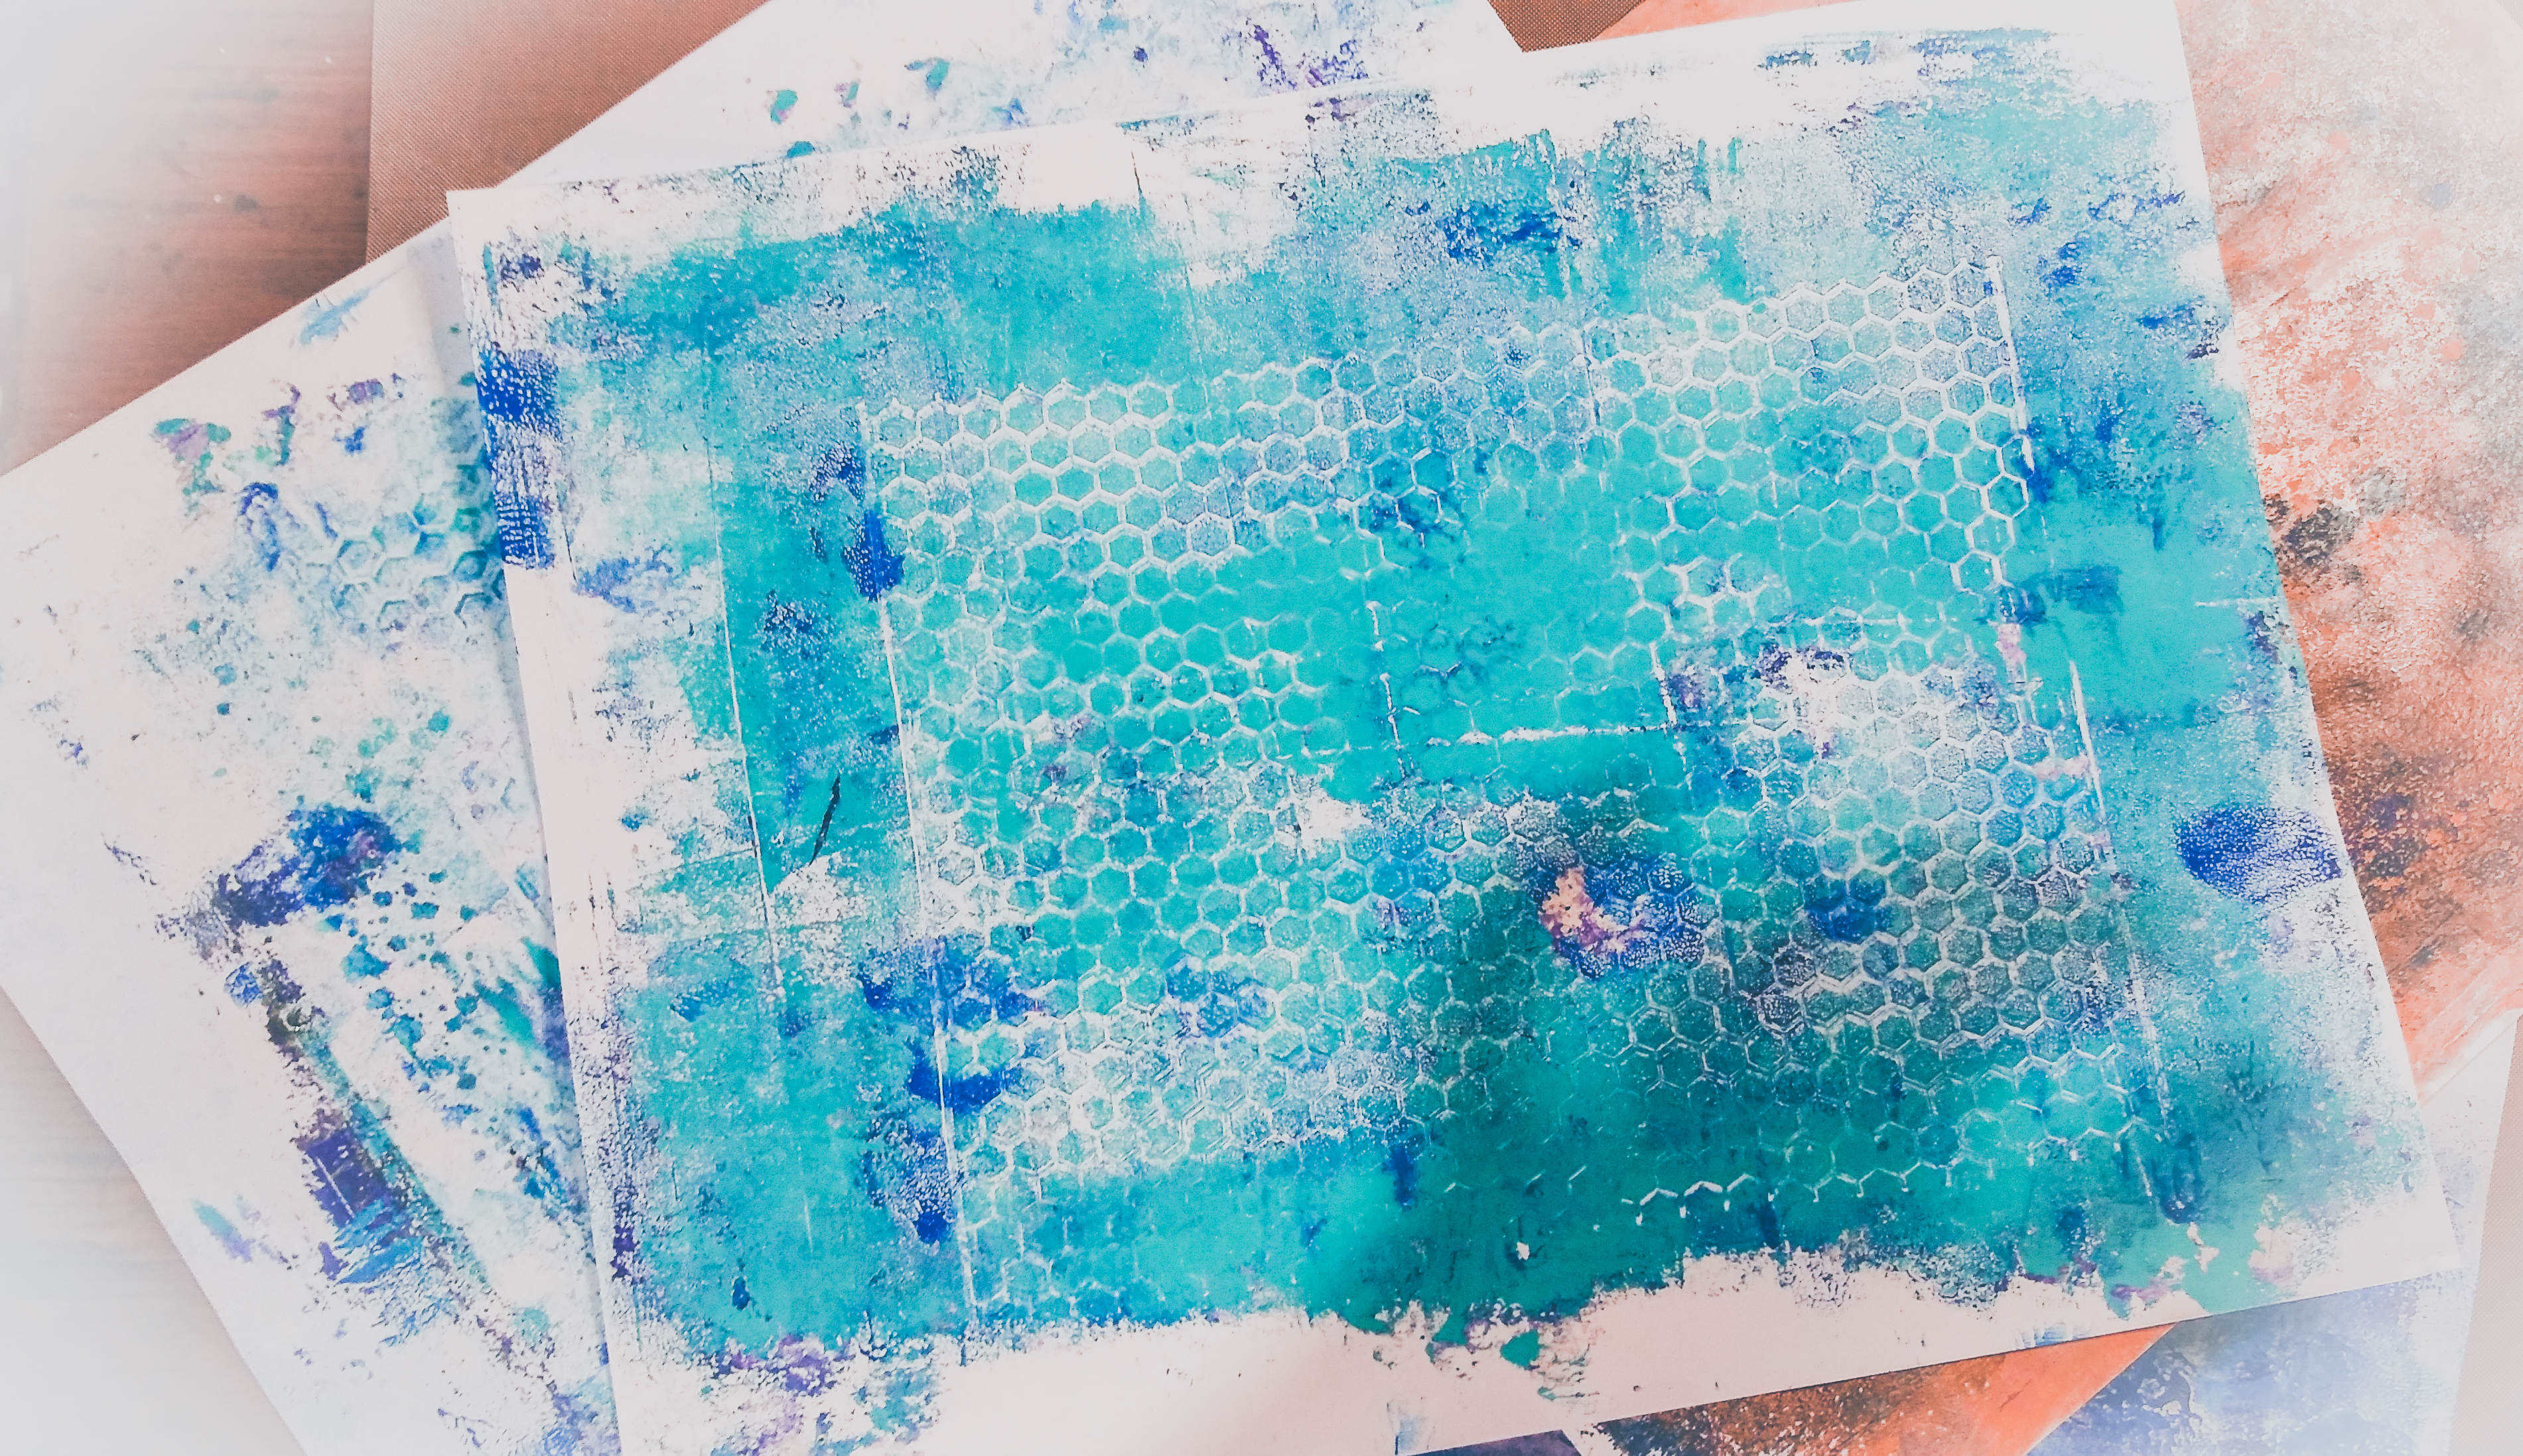 Activity: Create a Gelatin Printing Plate to Make Patterned Prints